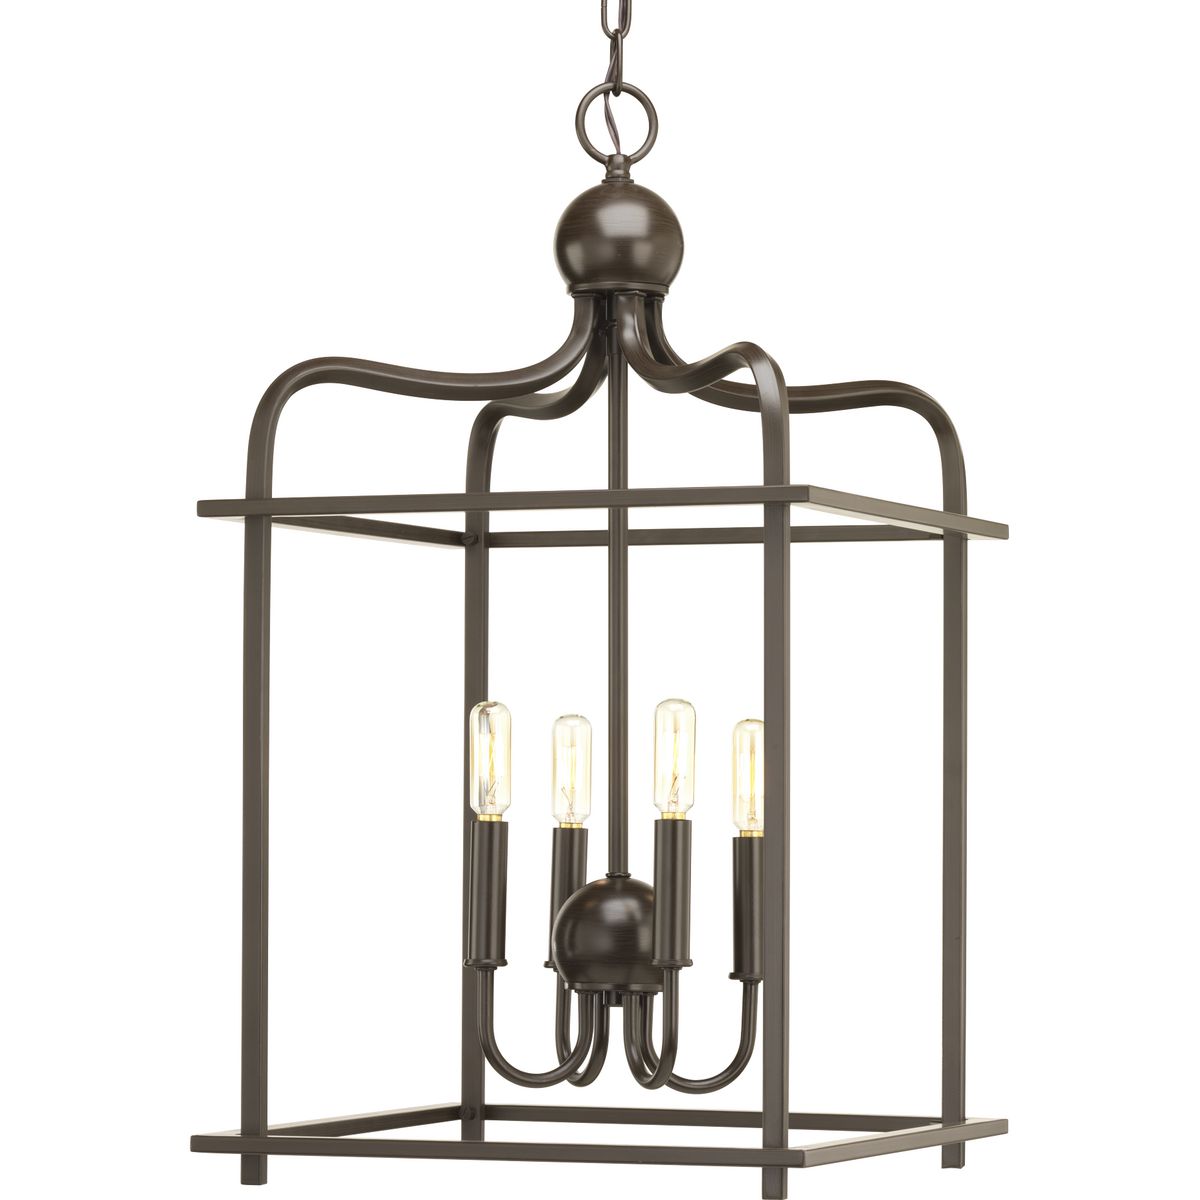 Assembly Hall provides a formal and classic open caged pendant for a variety of traditional and transitional interiors. This Design Series collection features arching frames that are great in scale and surround a candelabra cluster with matching candles. Optional Antique Brass candle covers included for varied look. Four-Light Antique Bronze Foyer Pendant.